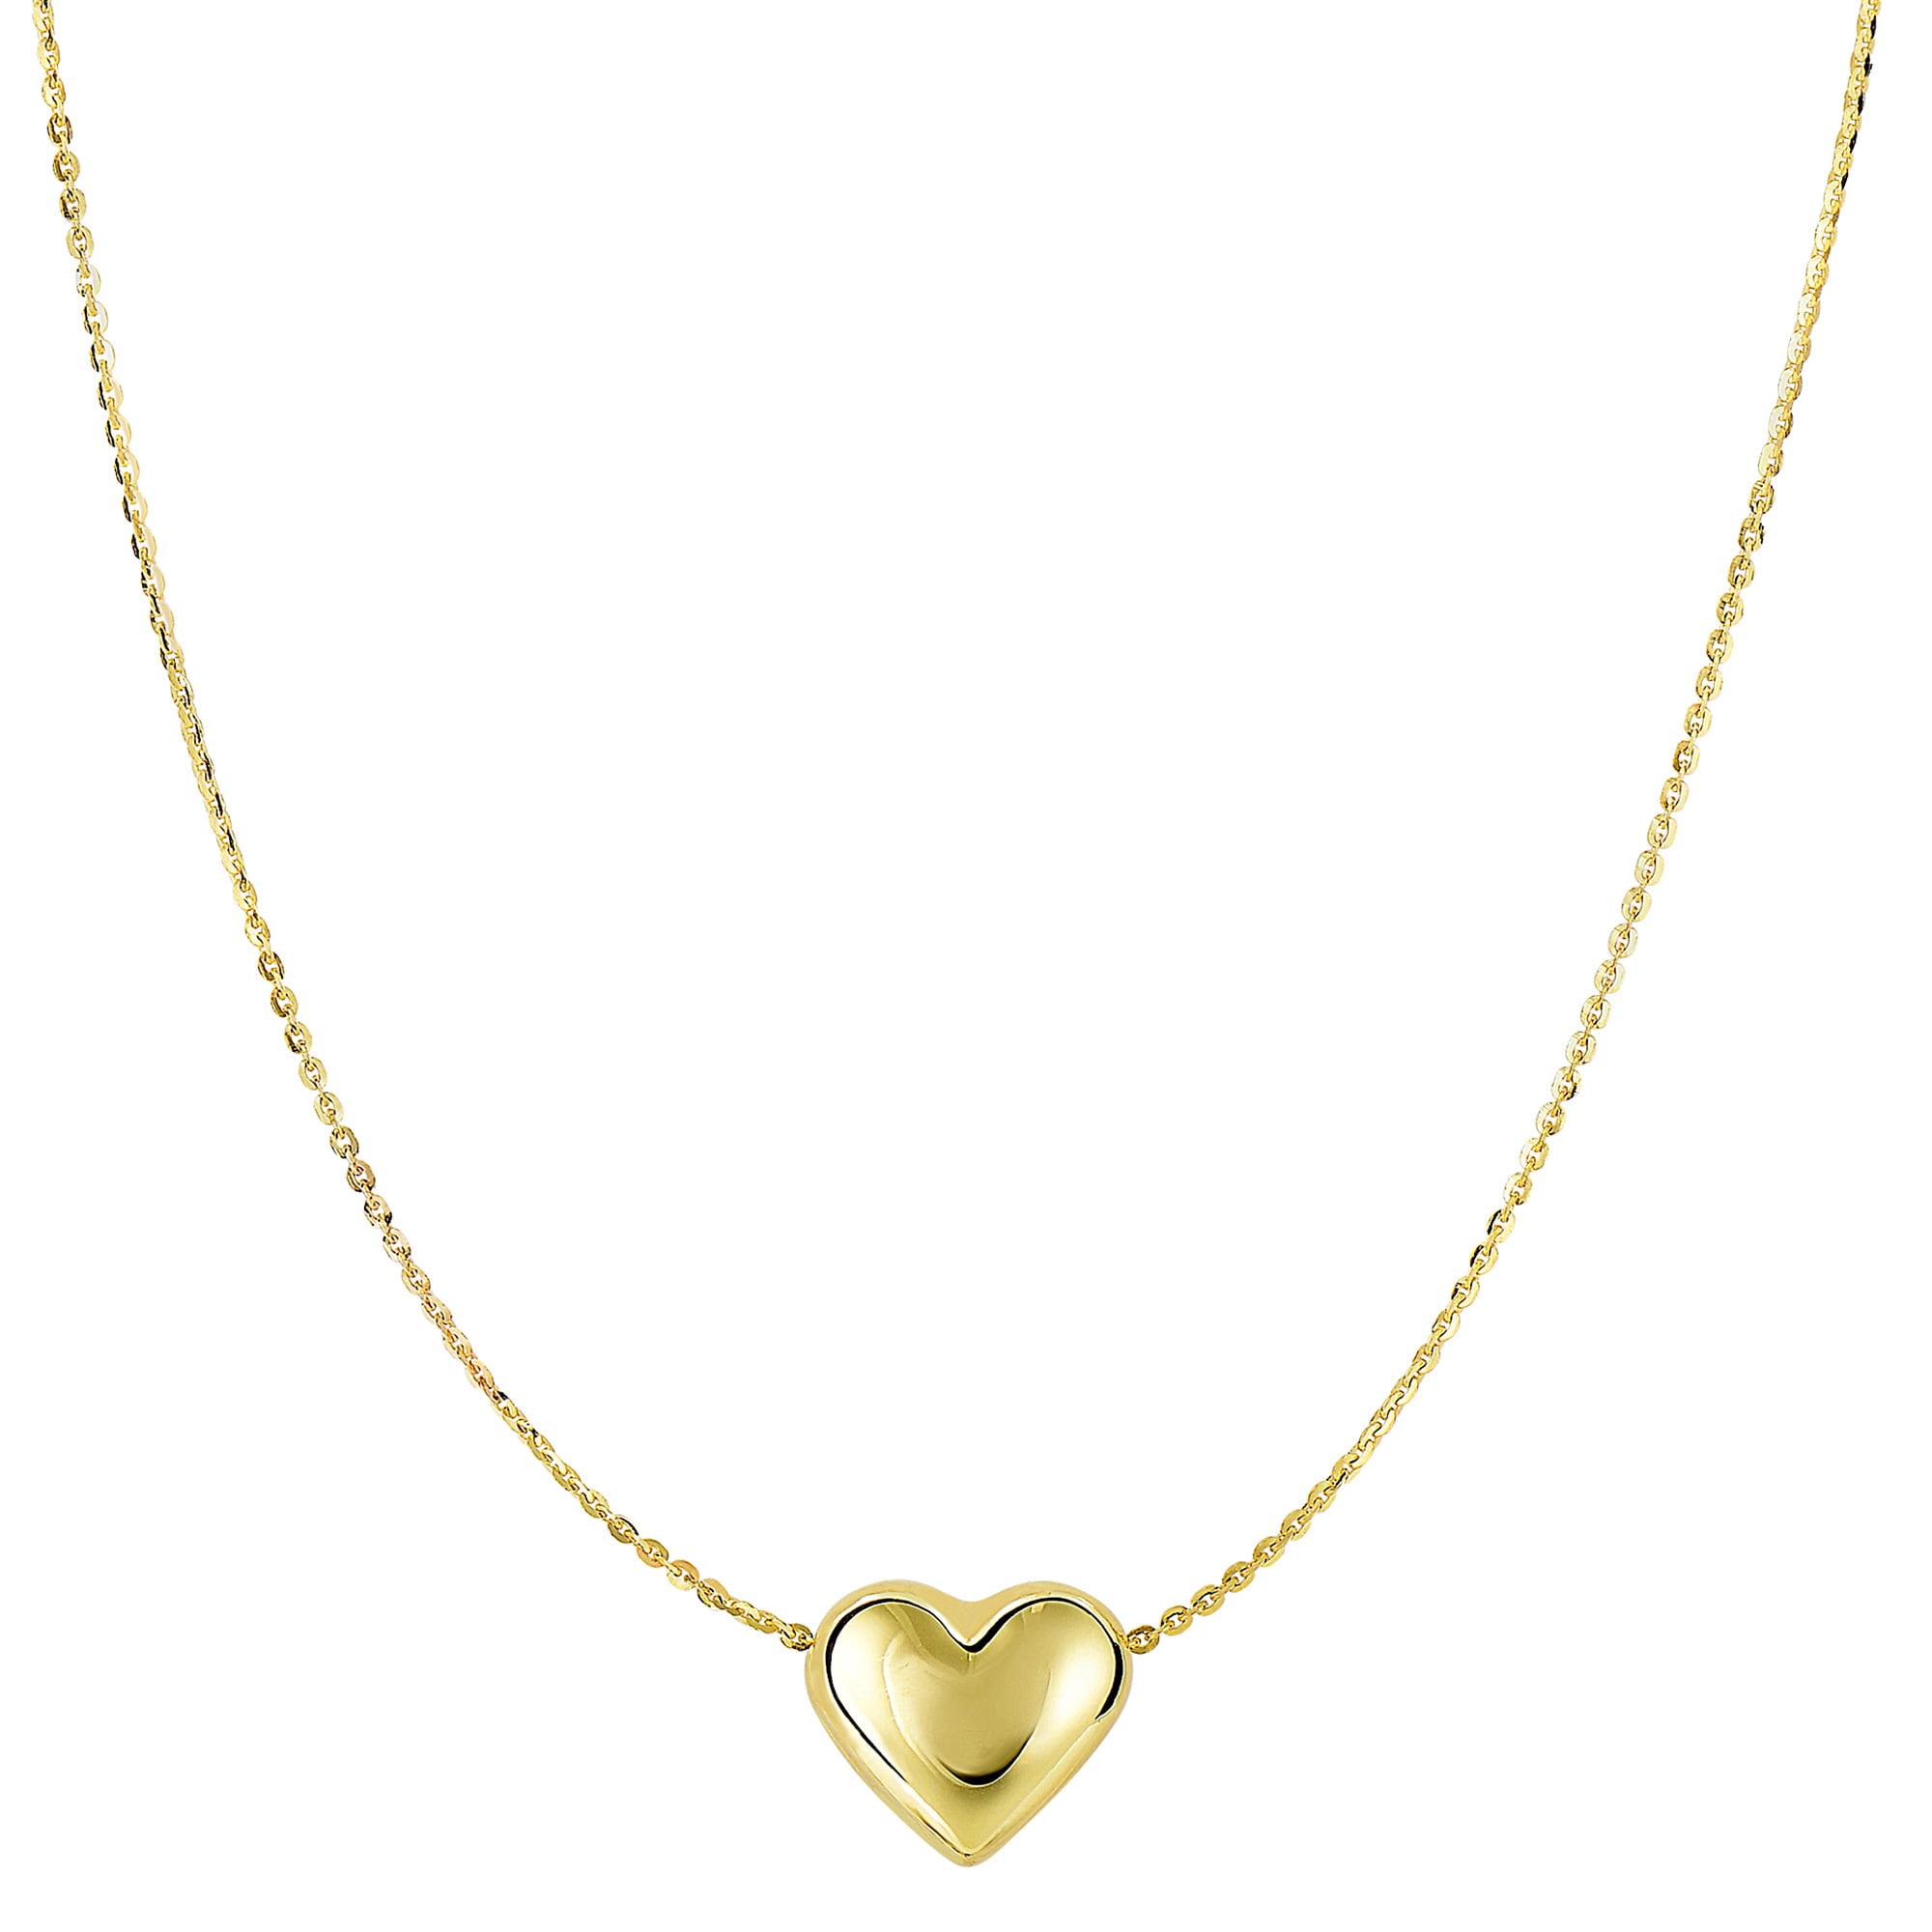 14k Gold Solid Polished Plain Puffed Heart Charm New Pendant Yellow Gold